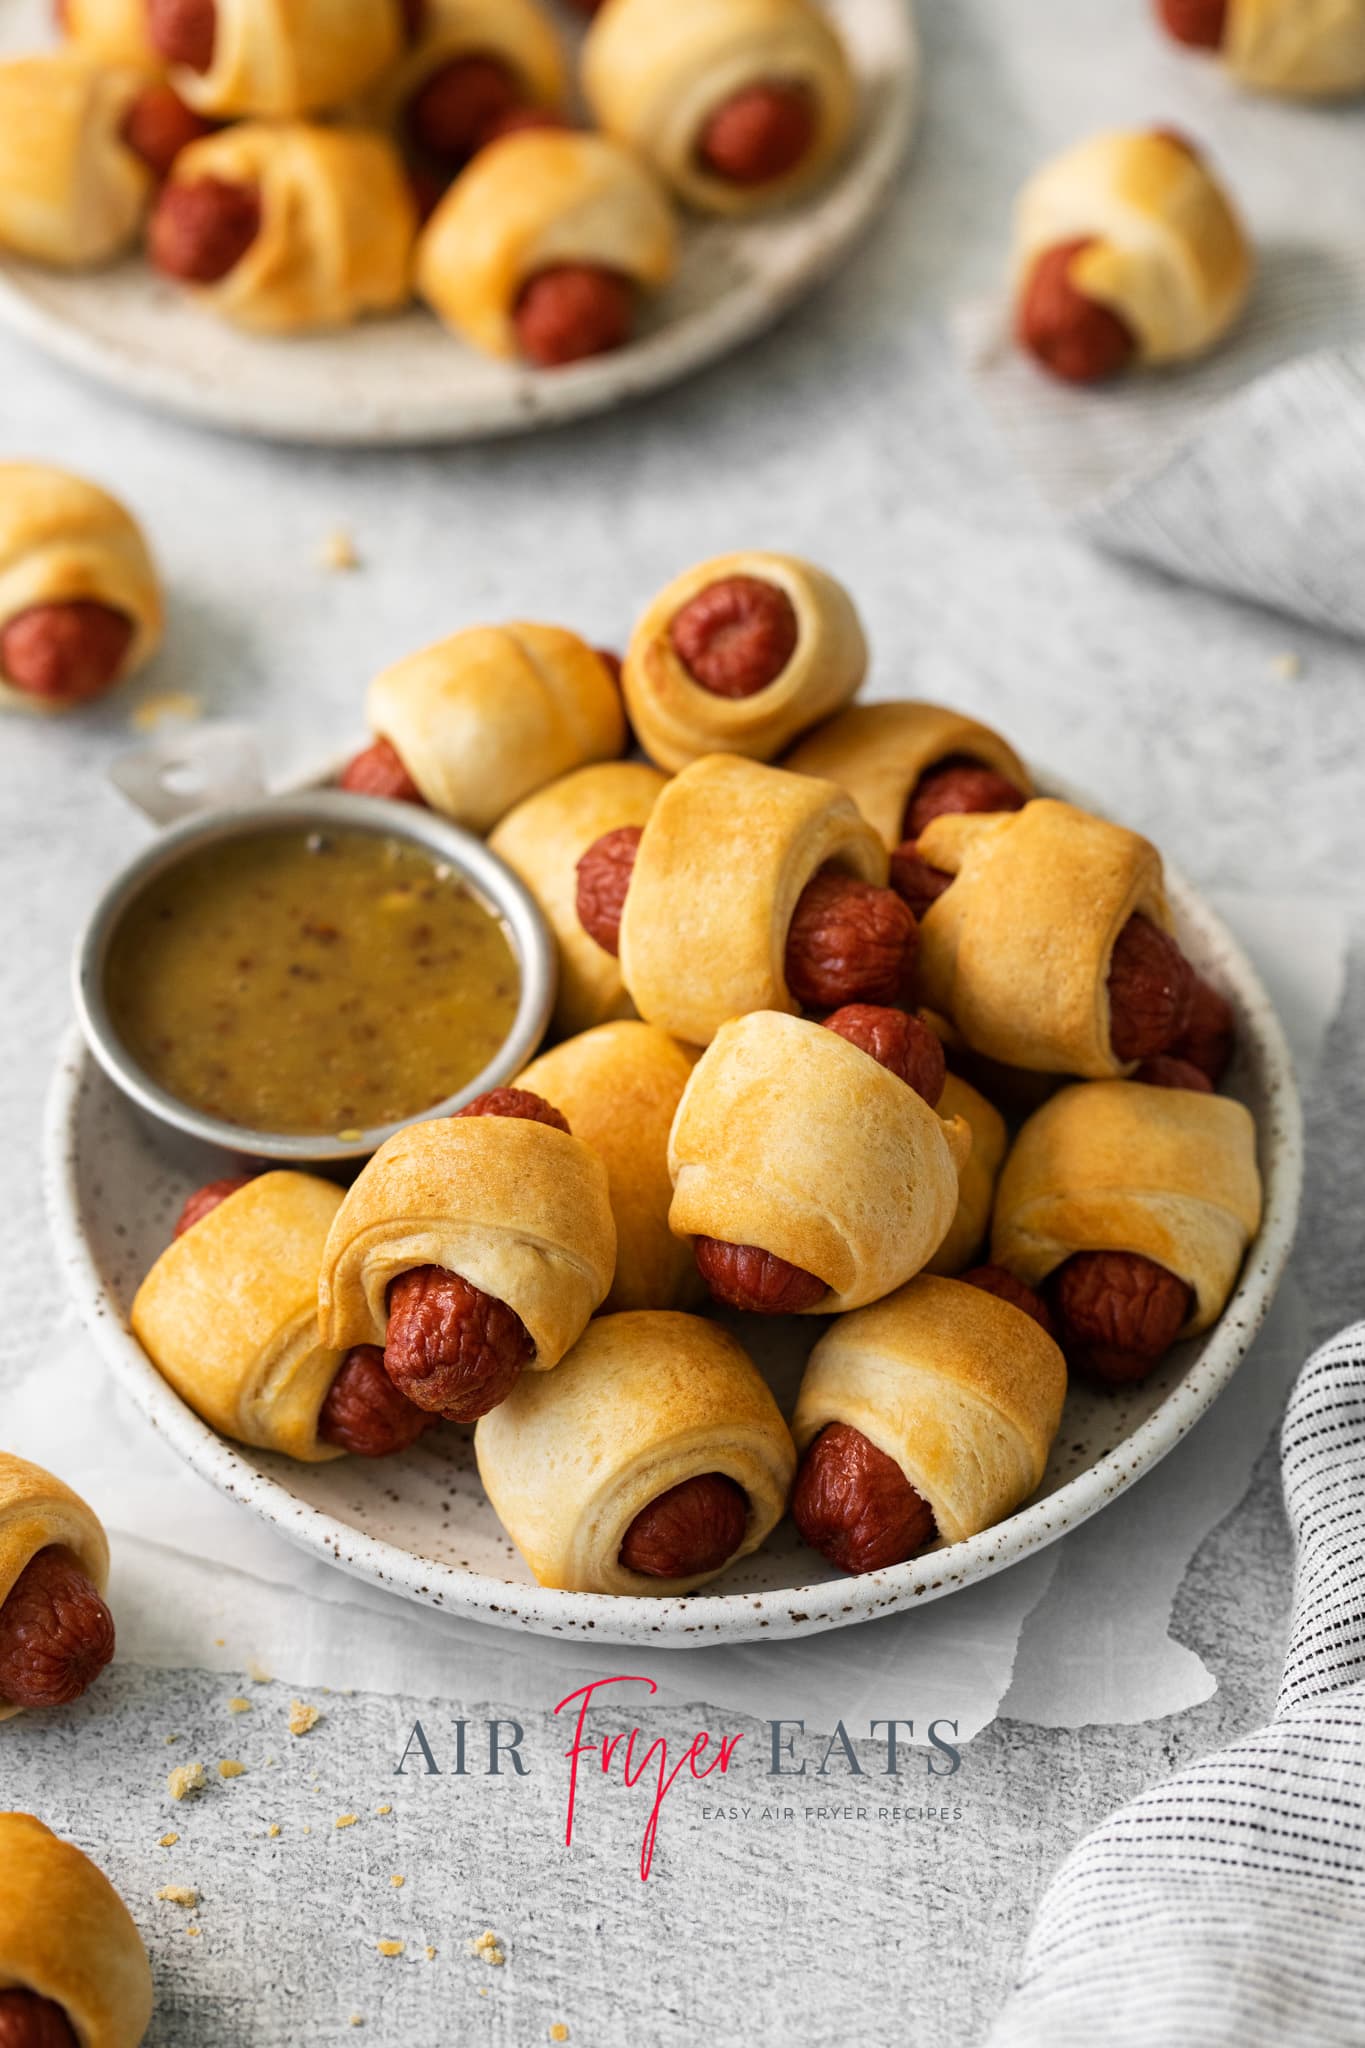 Photo of a plate of Air Fryer Pigs in a Blanket, with a small silver dish filled with dipping sauce. 